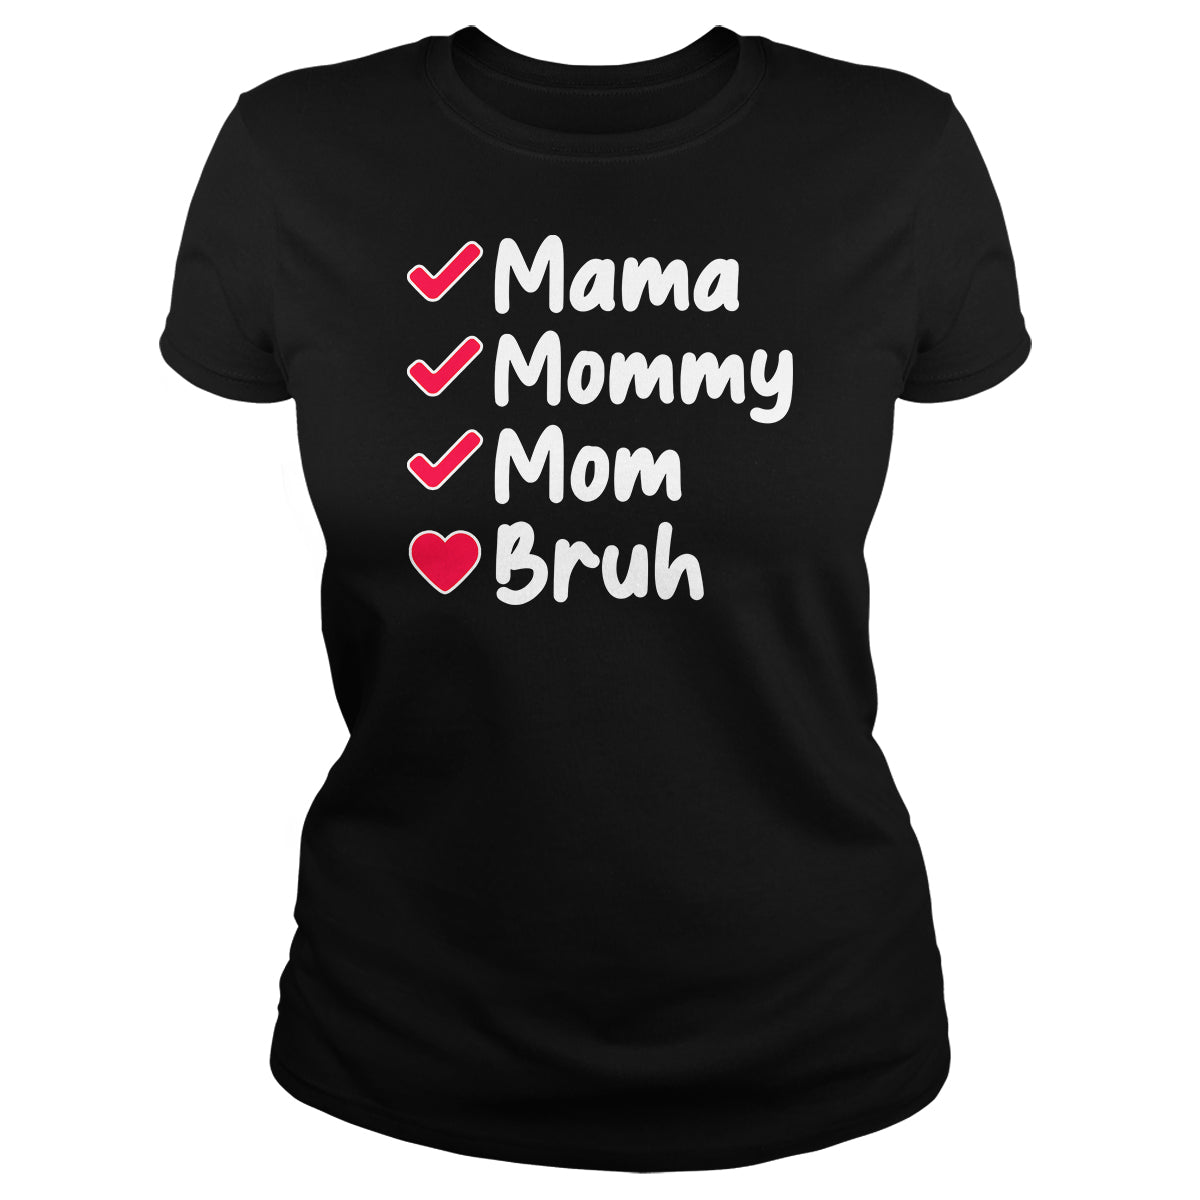 Mama To Bruh - BustedTees.com